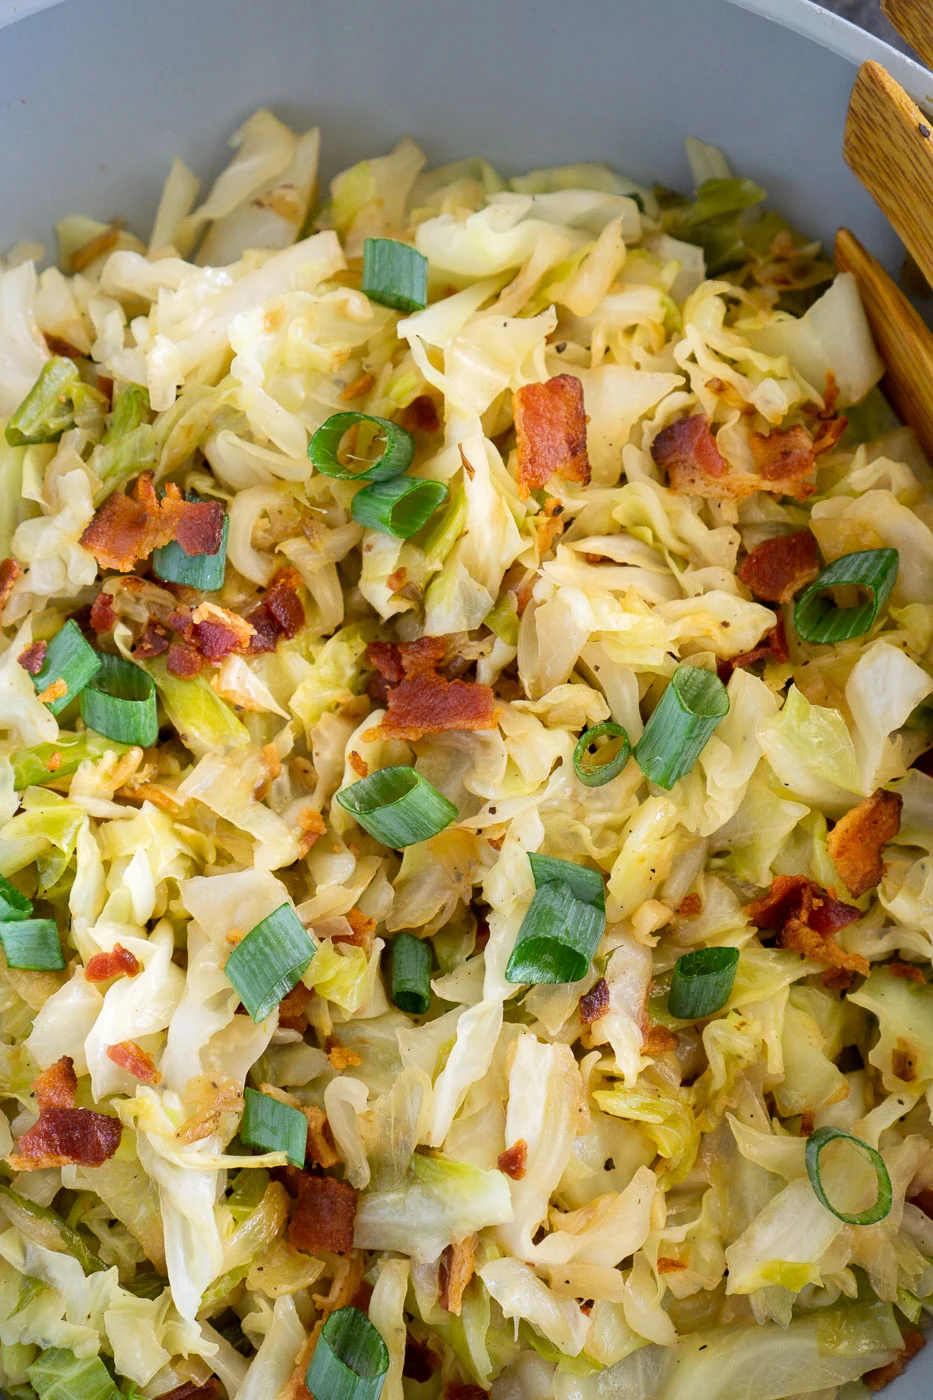 sauteed cabbage and bacon on a skillet - close up image